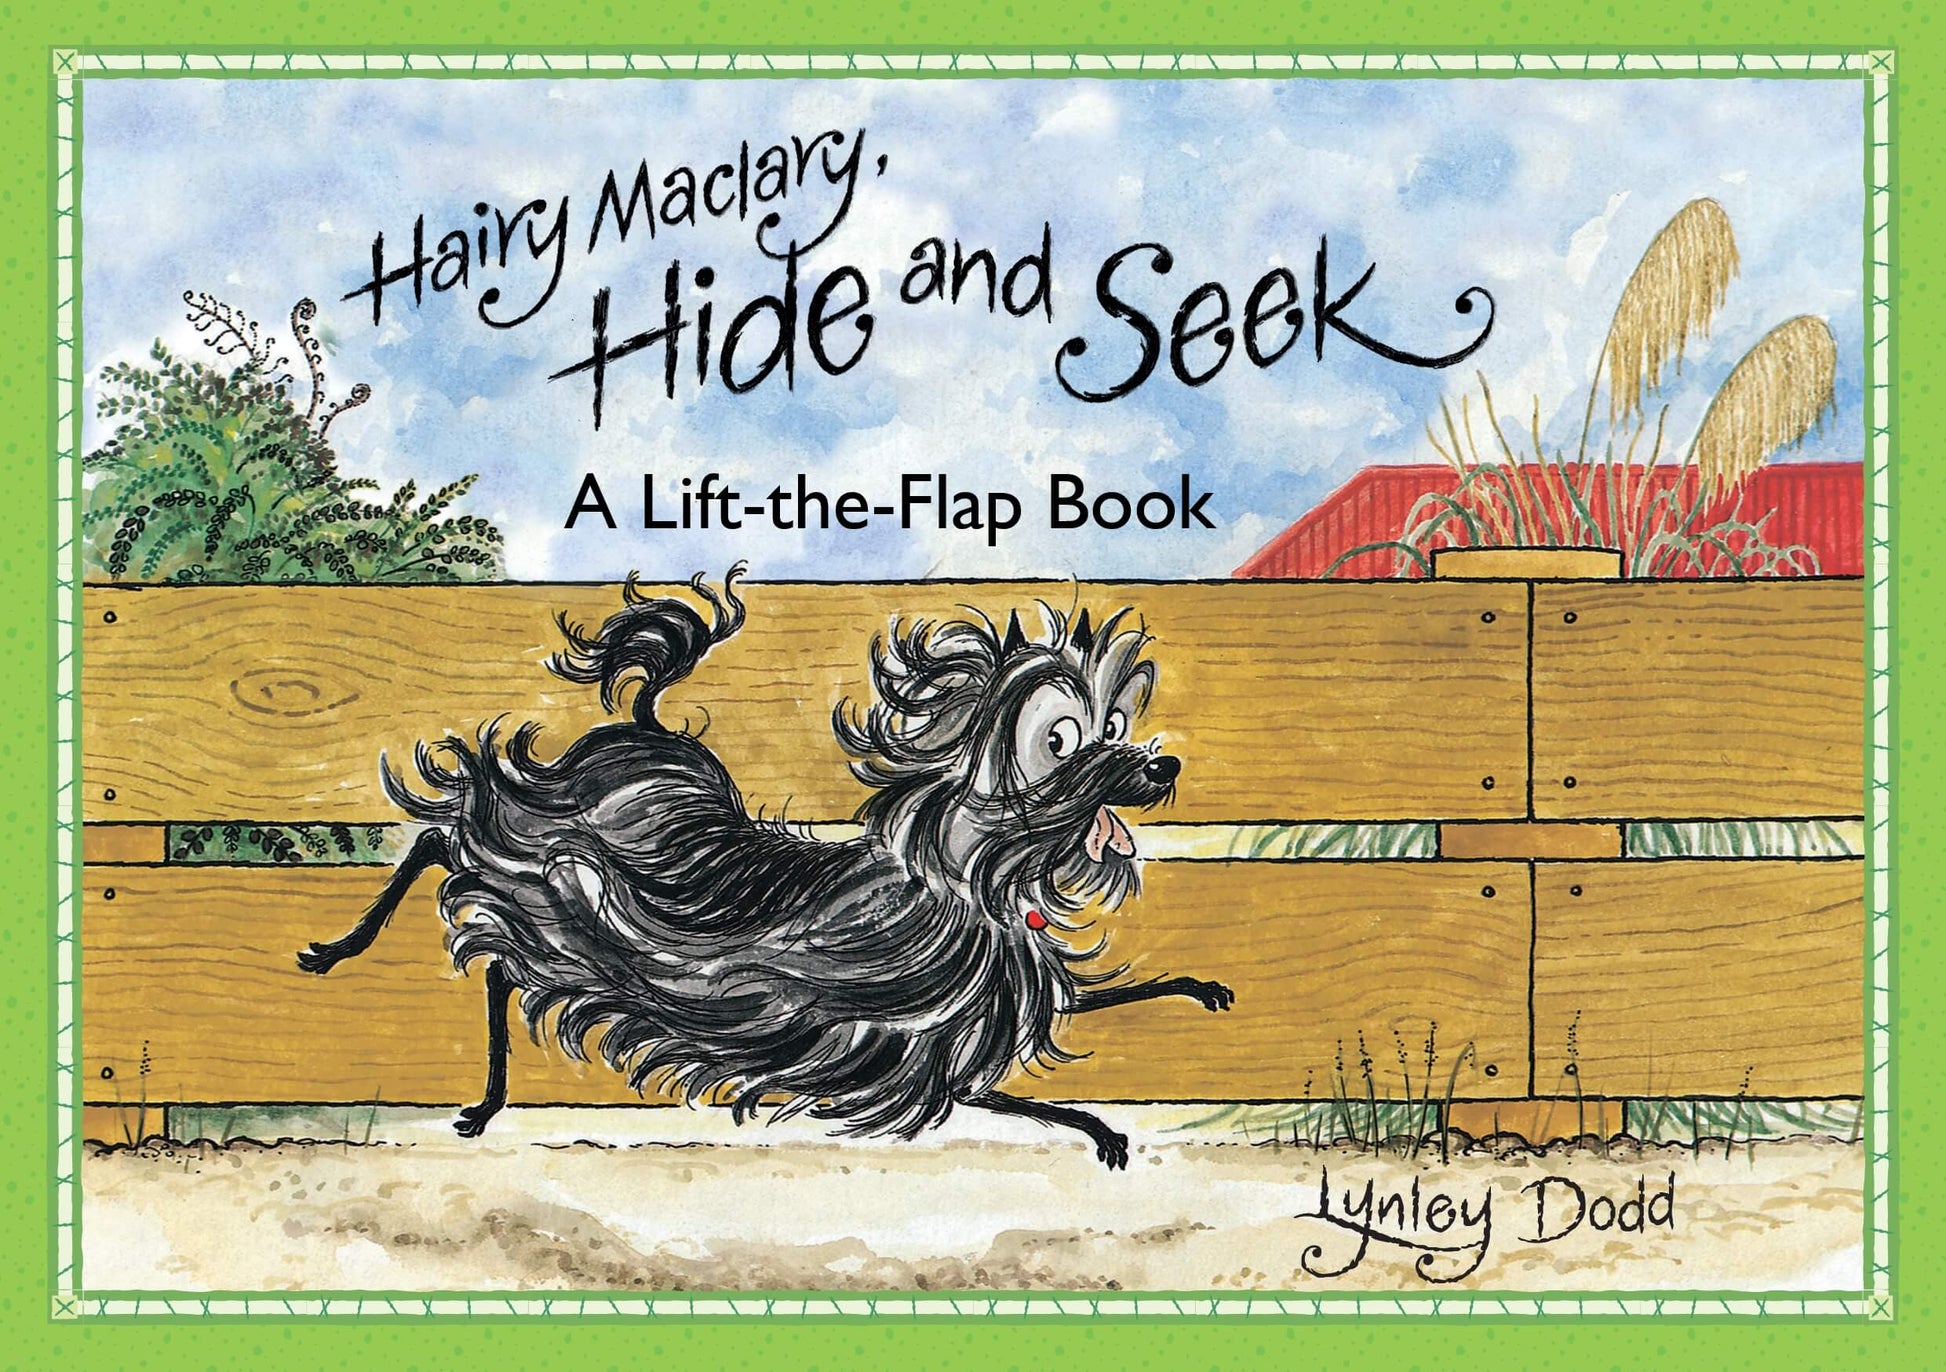 Hairy Maclary Hide & Seek Lift-the-Flap Book by Lynley Dodd available at Bear & Moo